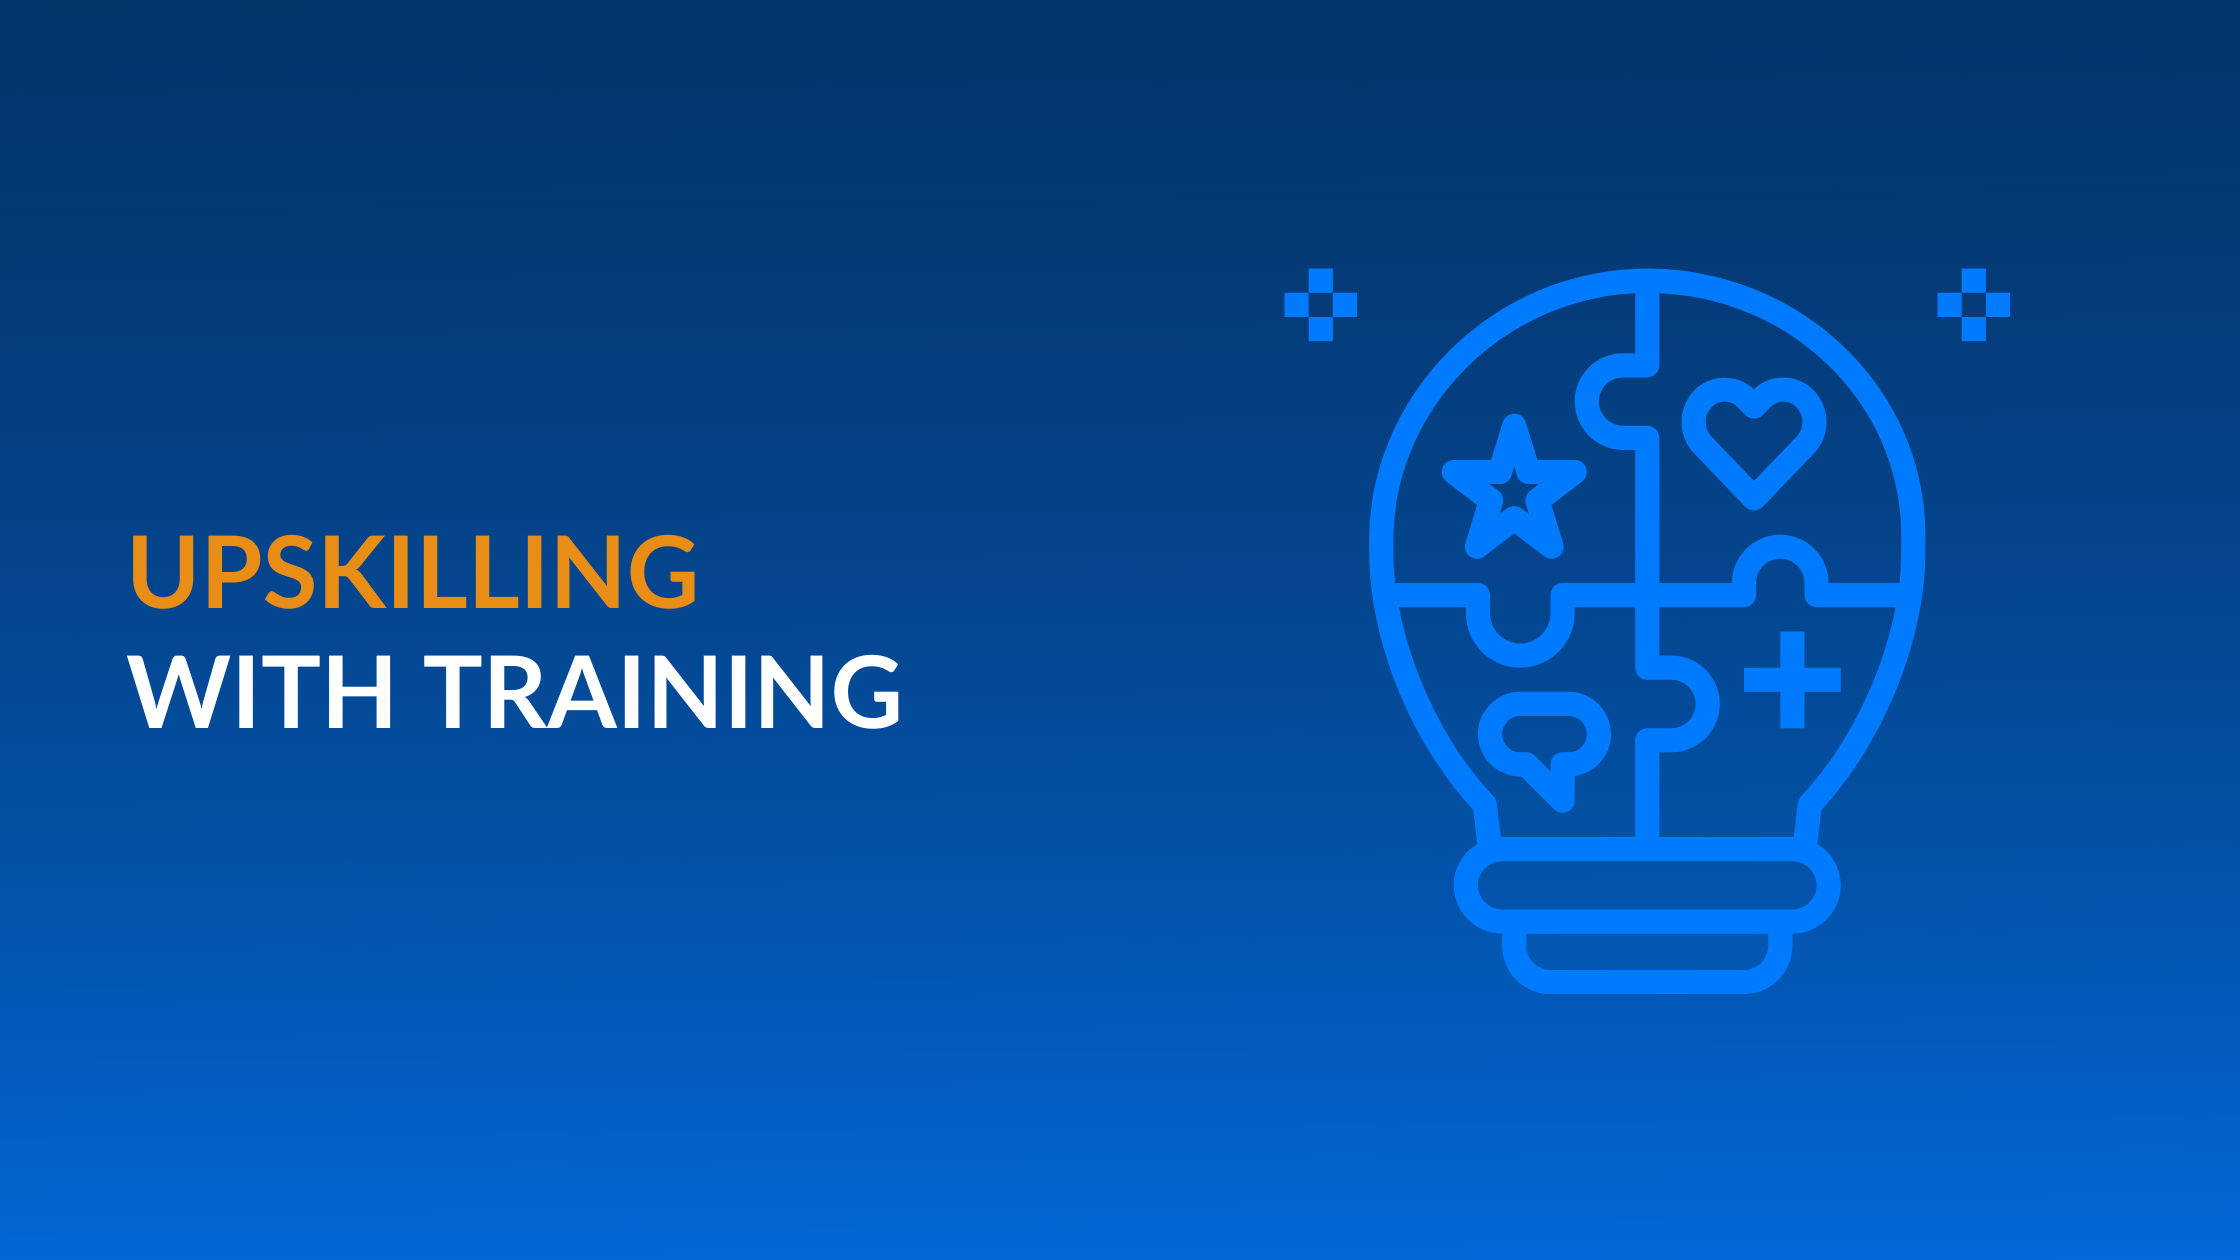 Upskilling with Training: Why it's Important to Your Organization